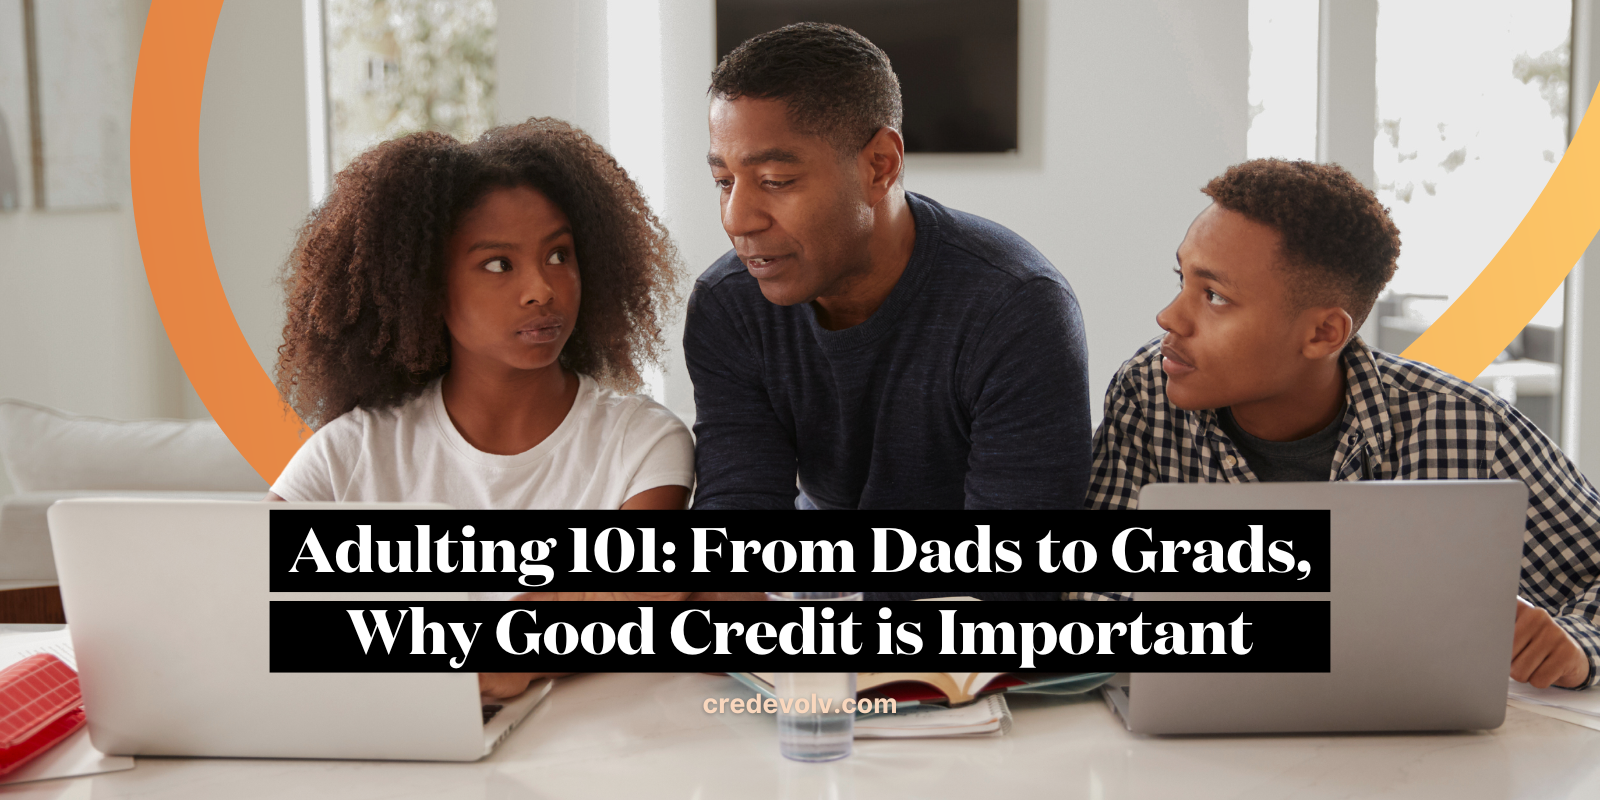 CredEvolv Blog - Featured Image - Why Having Good Credit Is Important